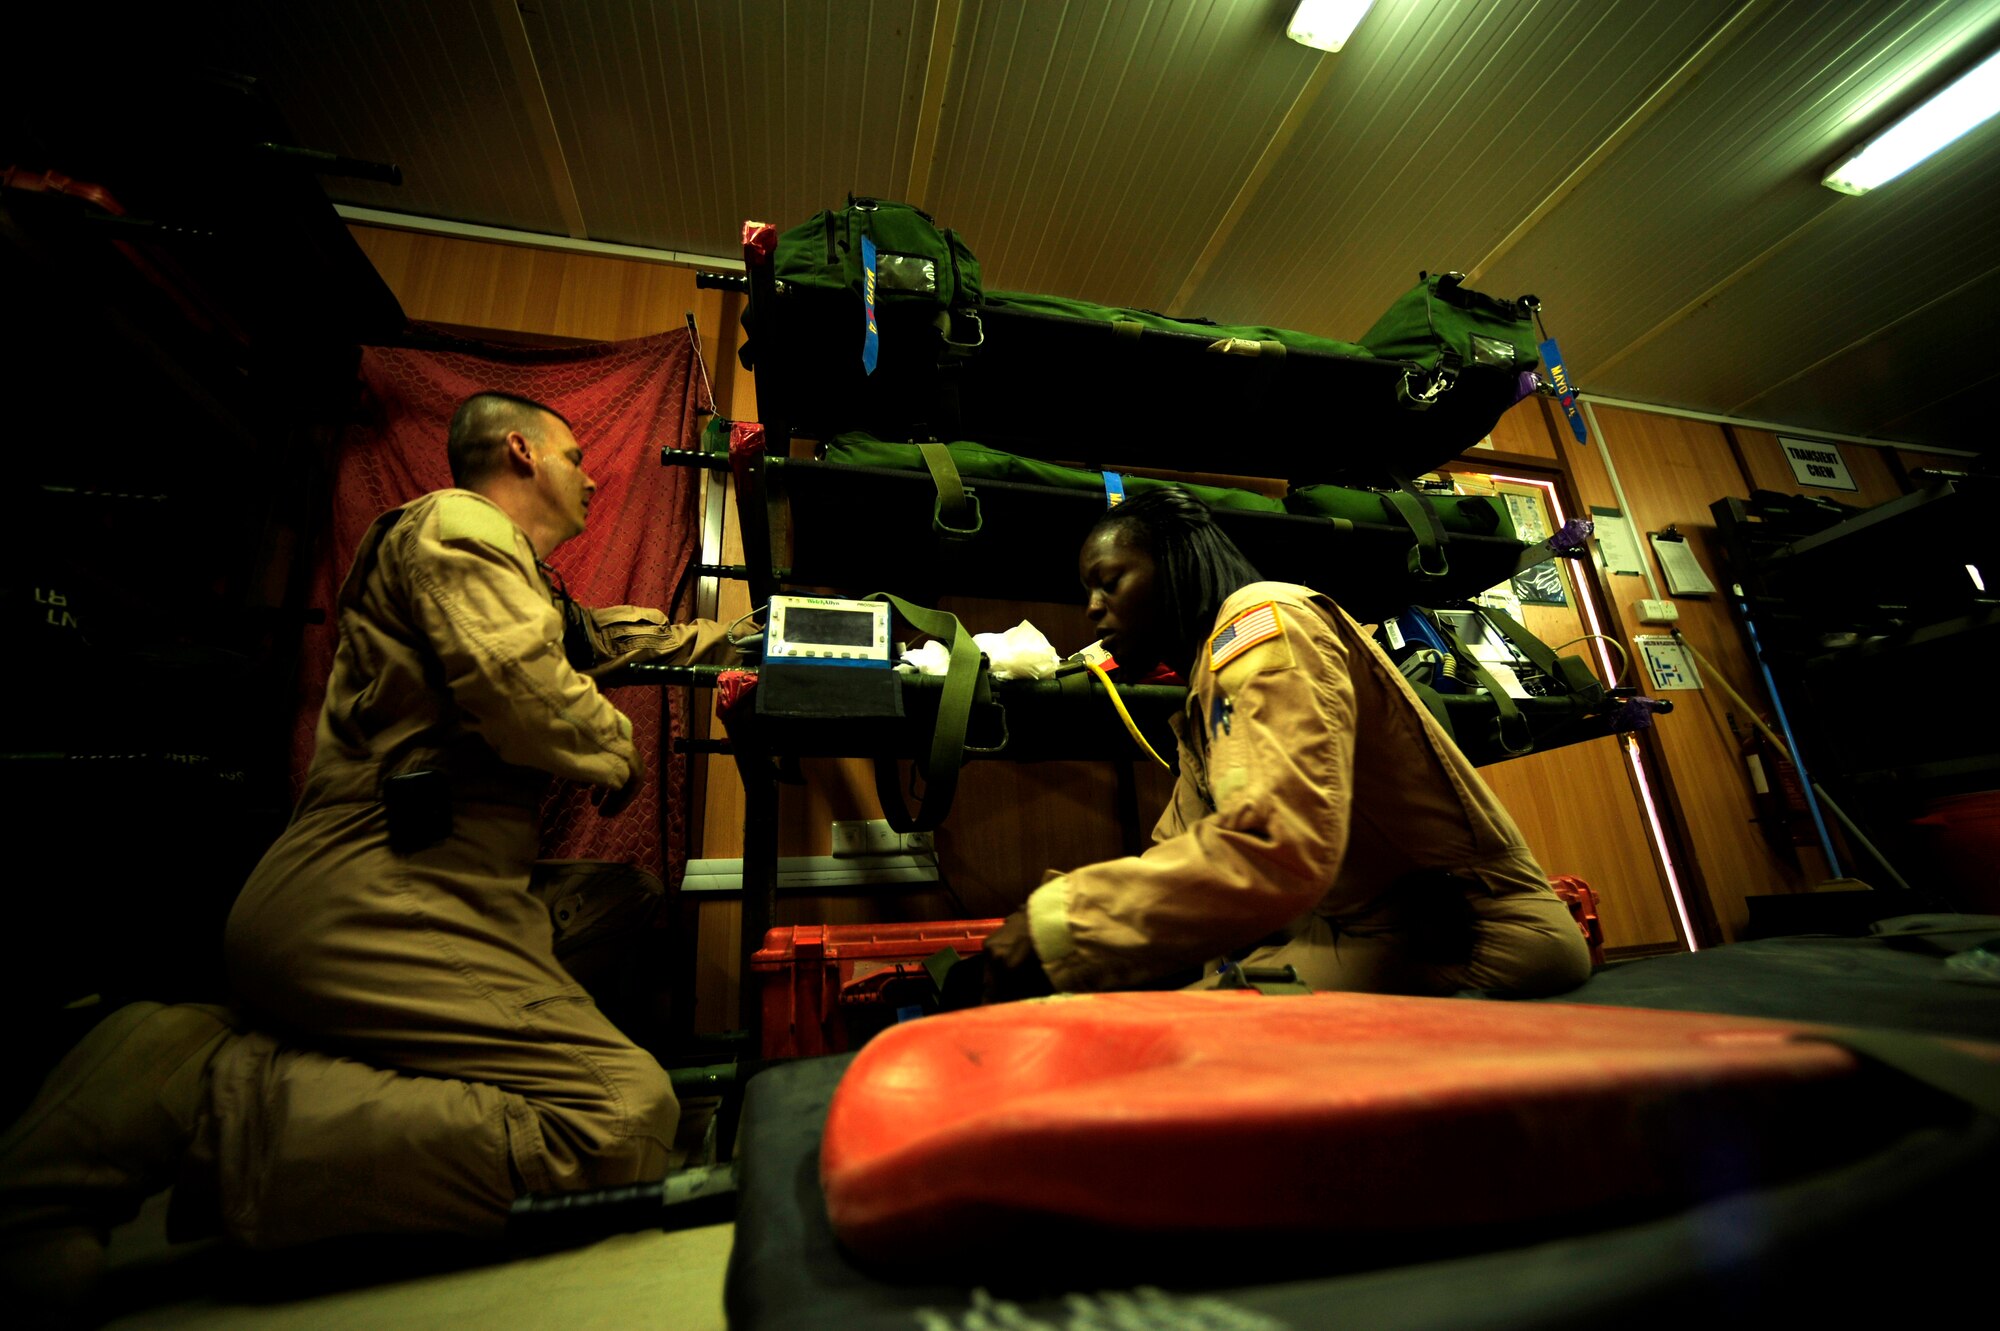 U.S. Air Force aeromedical evacuation technicians reservists Senior Master Sgt. Tony Staut,(right) and Senior Airman Nicole Caldwell assigned to the 362nd Expeditionary Aeromedical Evacuation Flight, scan in all required gear and medical supplies for flying mission out of Joint Base Balad, Iraq on July 17, 2010.
(U.S. Air Force photo by Staff Sgt. Andy M. Kin / Released)